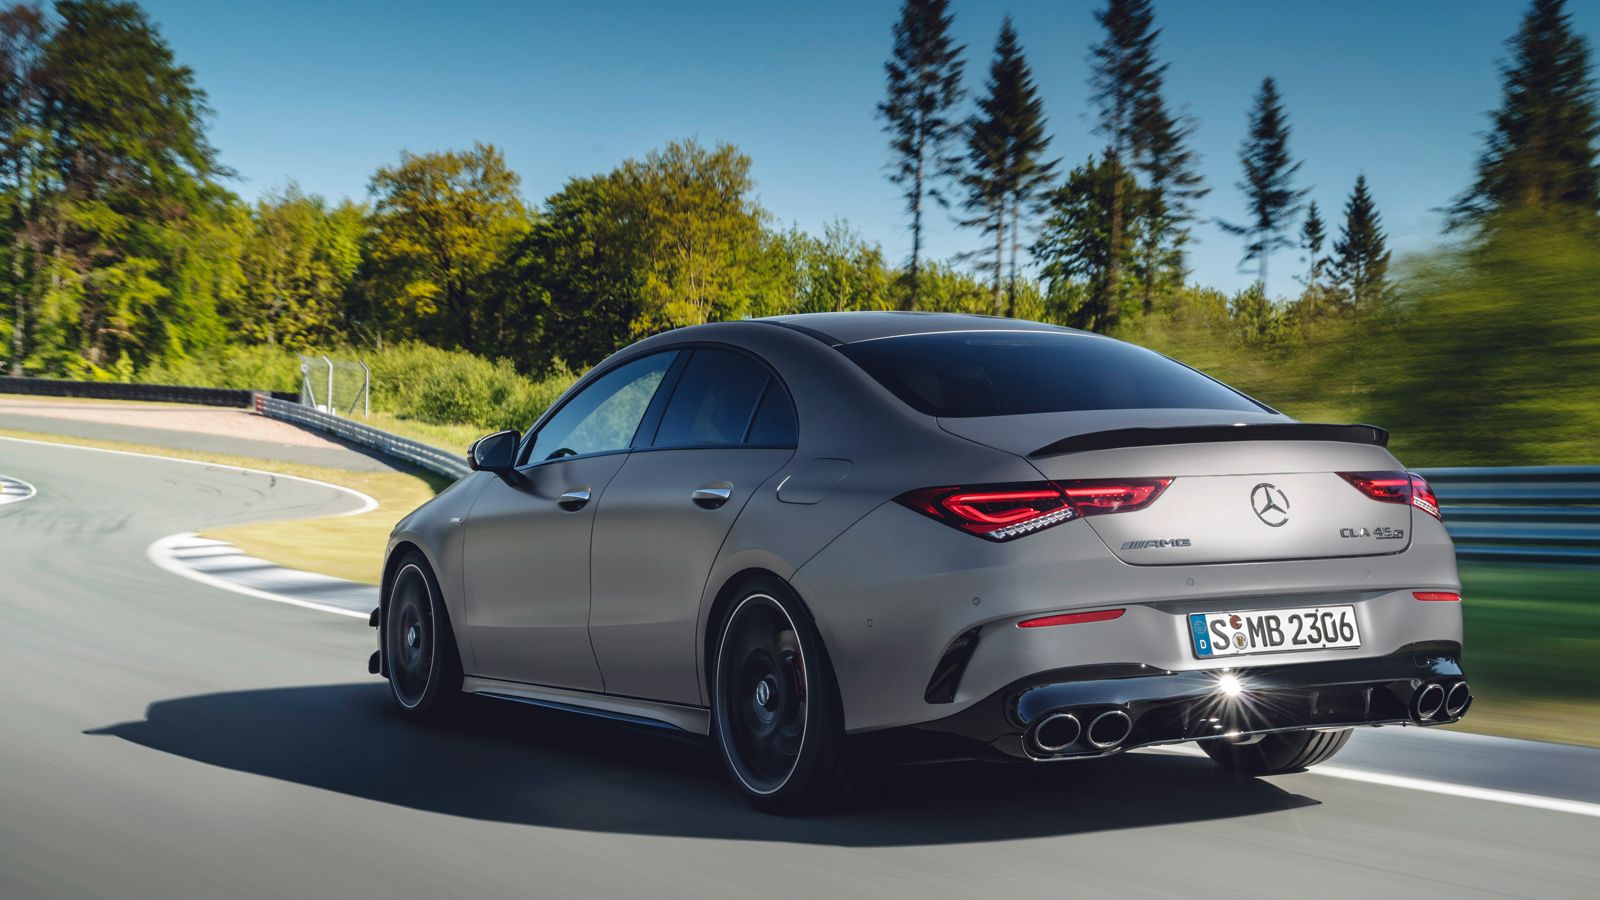 New 2023 MercedesAMG CLA 45 S 4MATIC FACELIFT  FIRST LOOK Exterior   Interior  YouTube